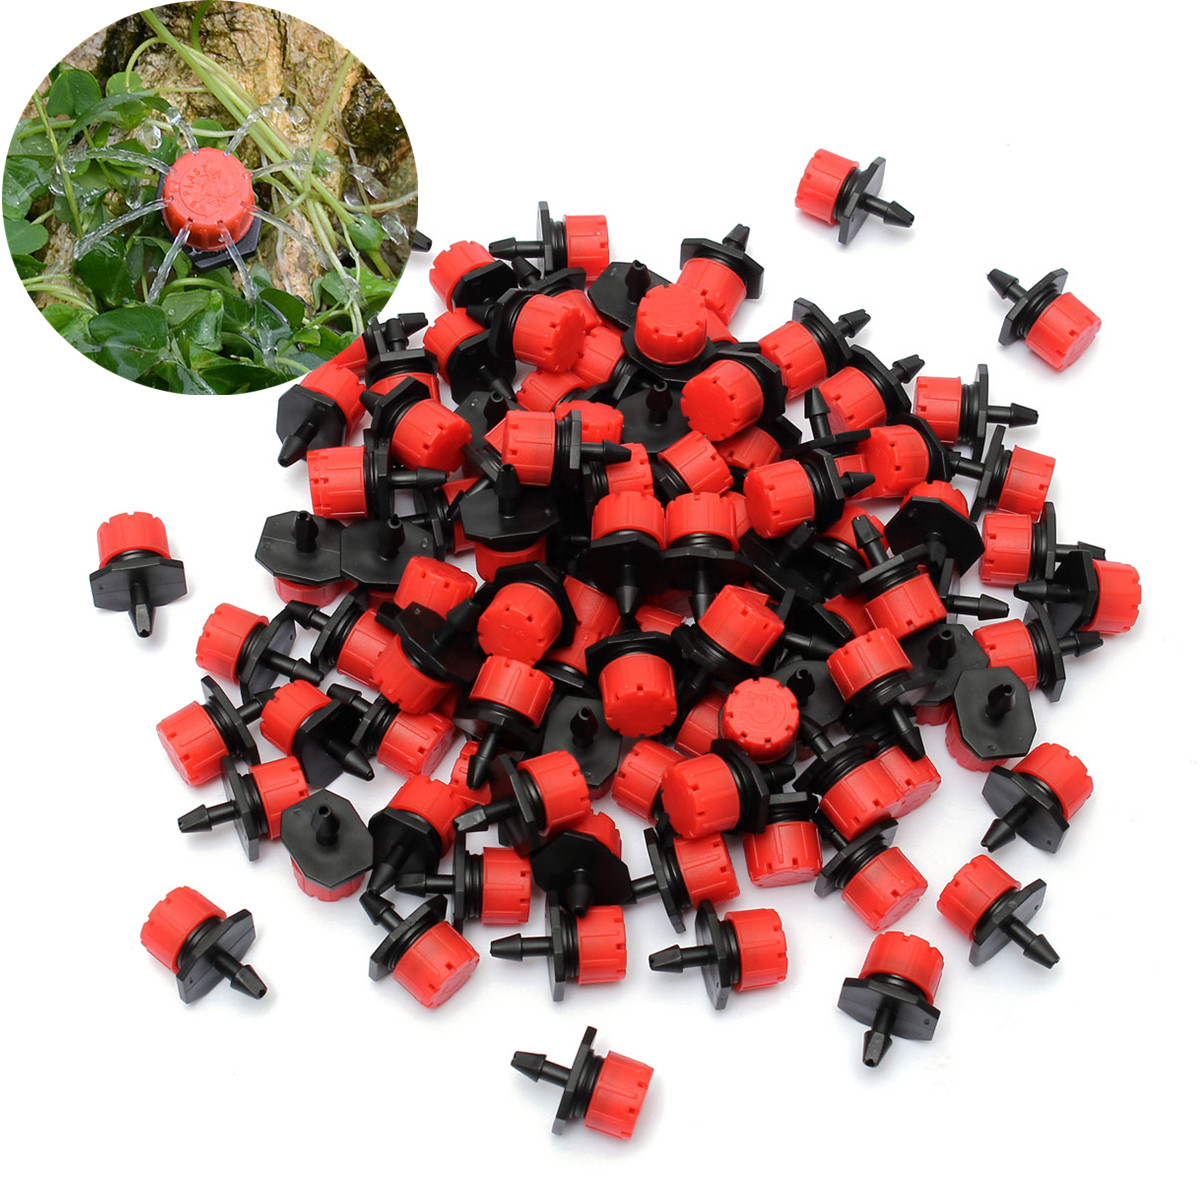 

100Pcs Adjustable Micro Drip Irrigation Watering Emitter Drippers 2.5 x 1.5cm